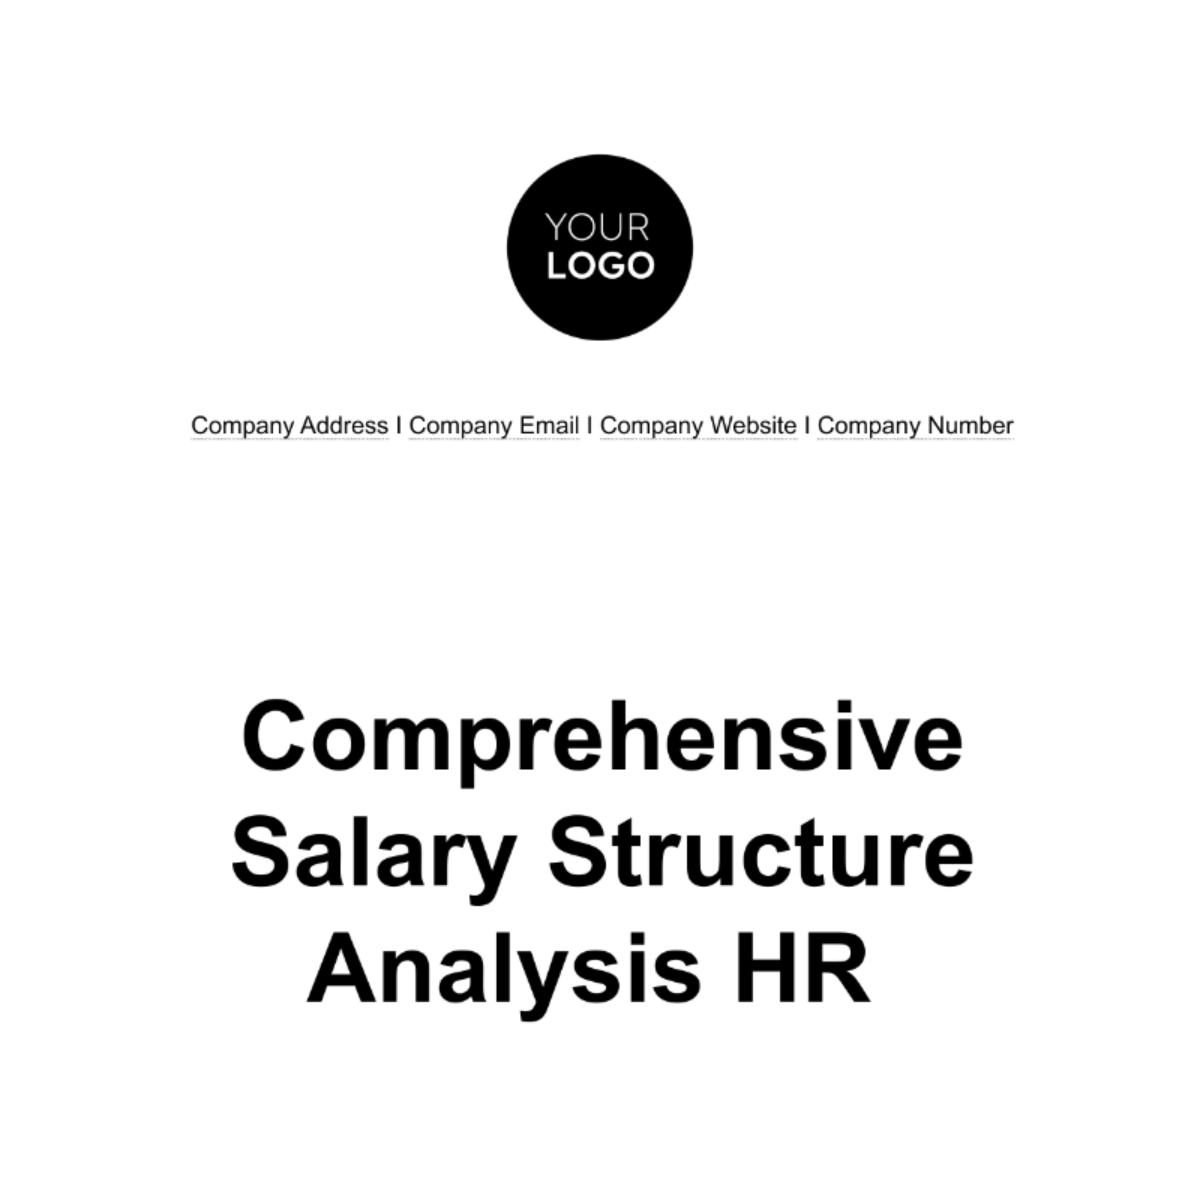 Comprehensive Salary Structure Analysis HR Template